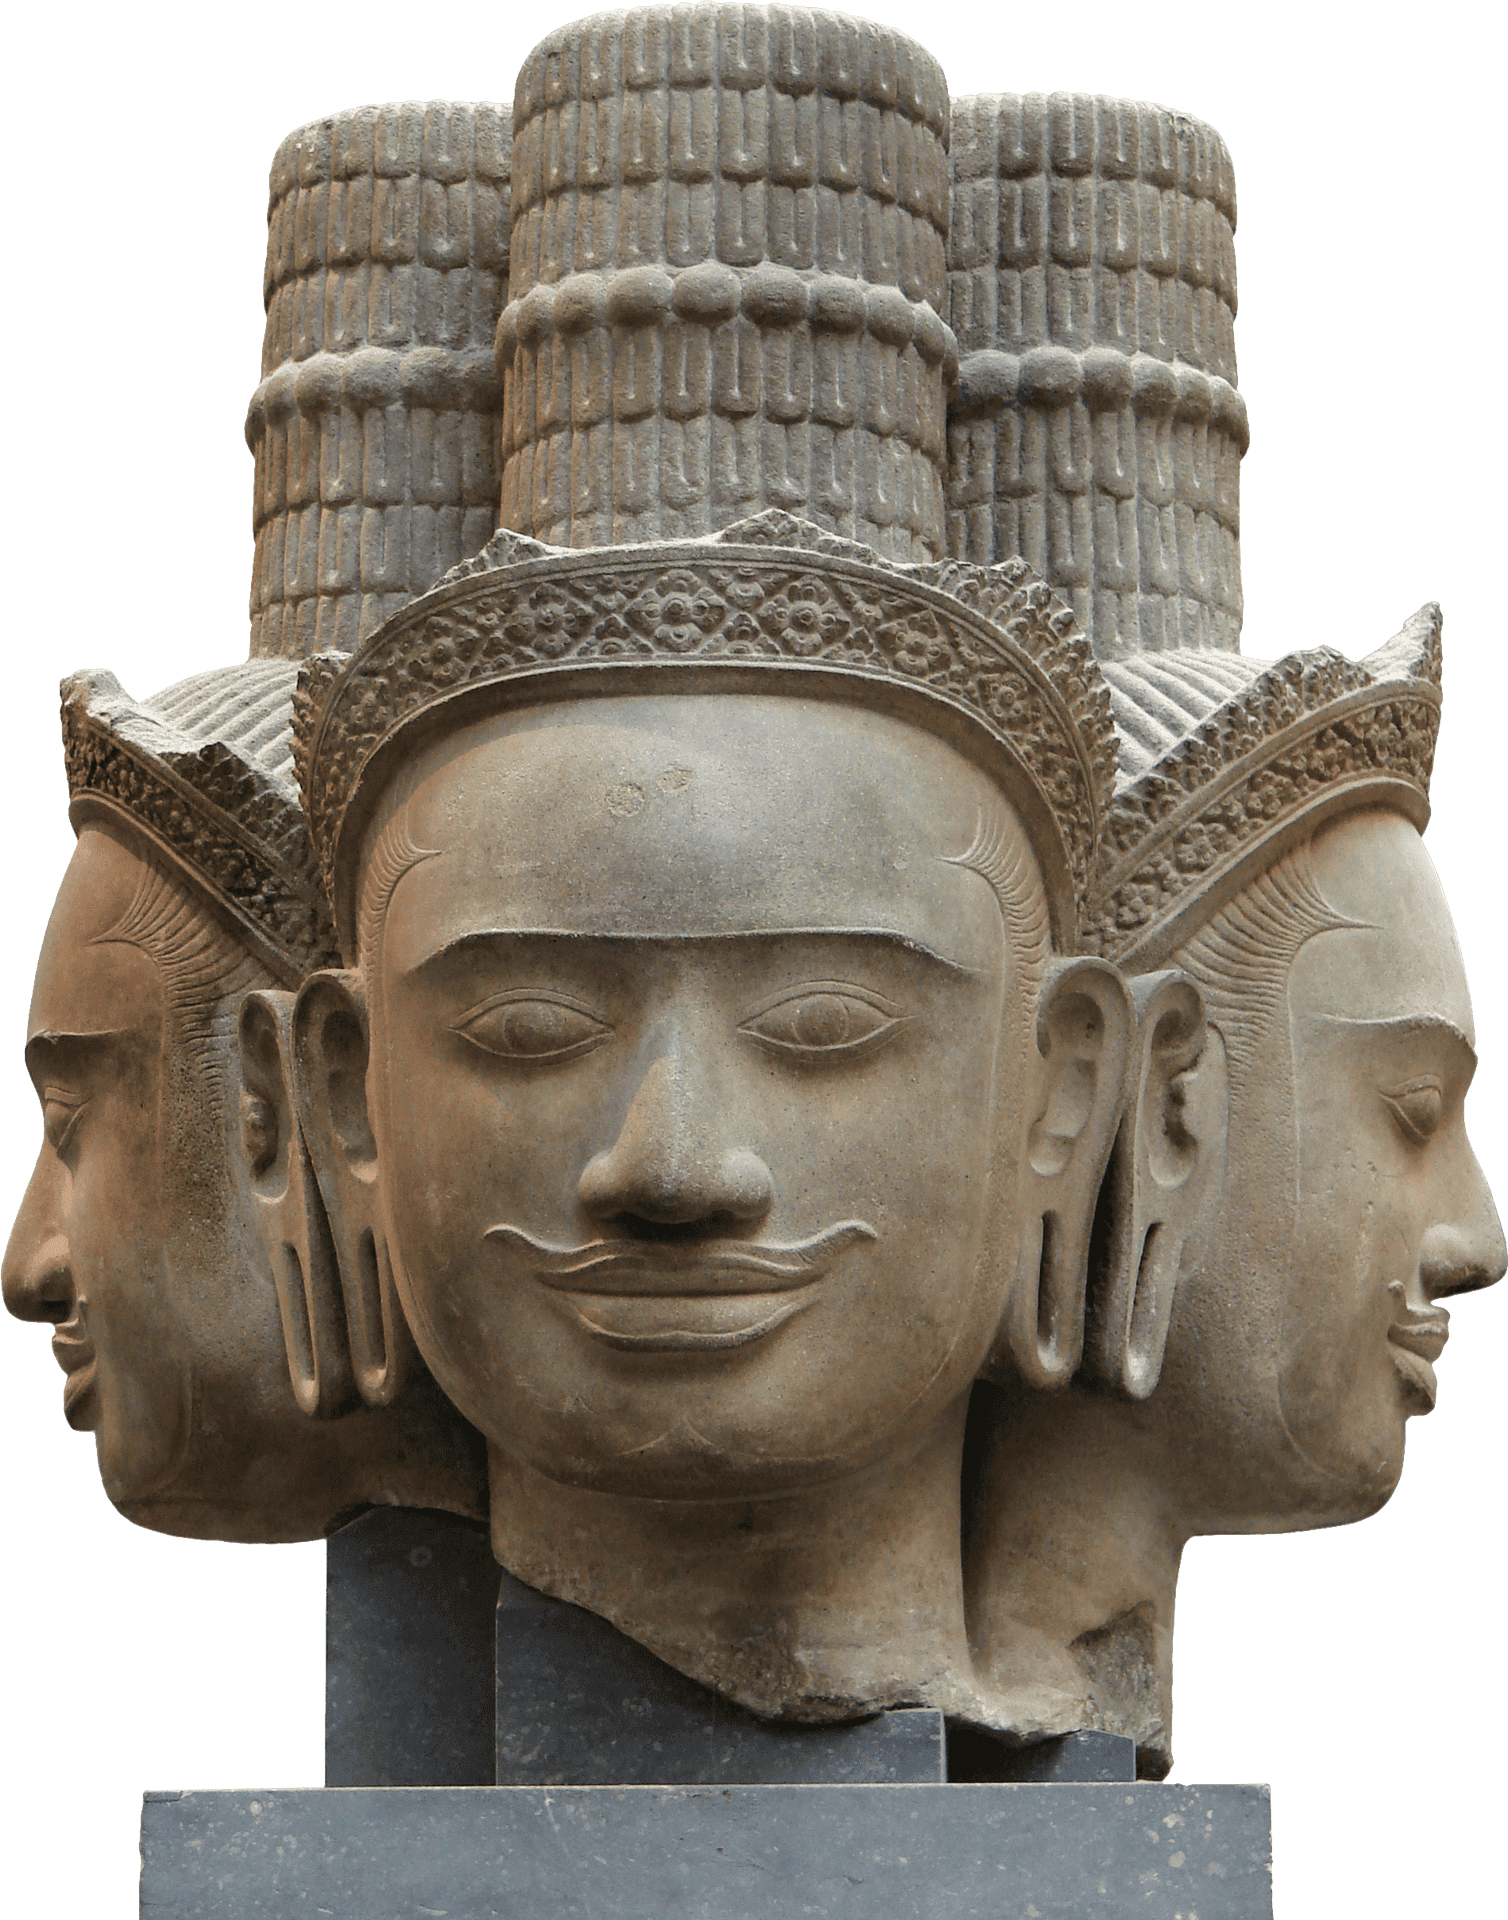 Four Faced Brahma Statue PNG image